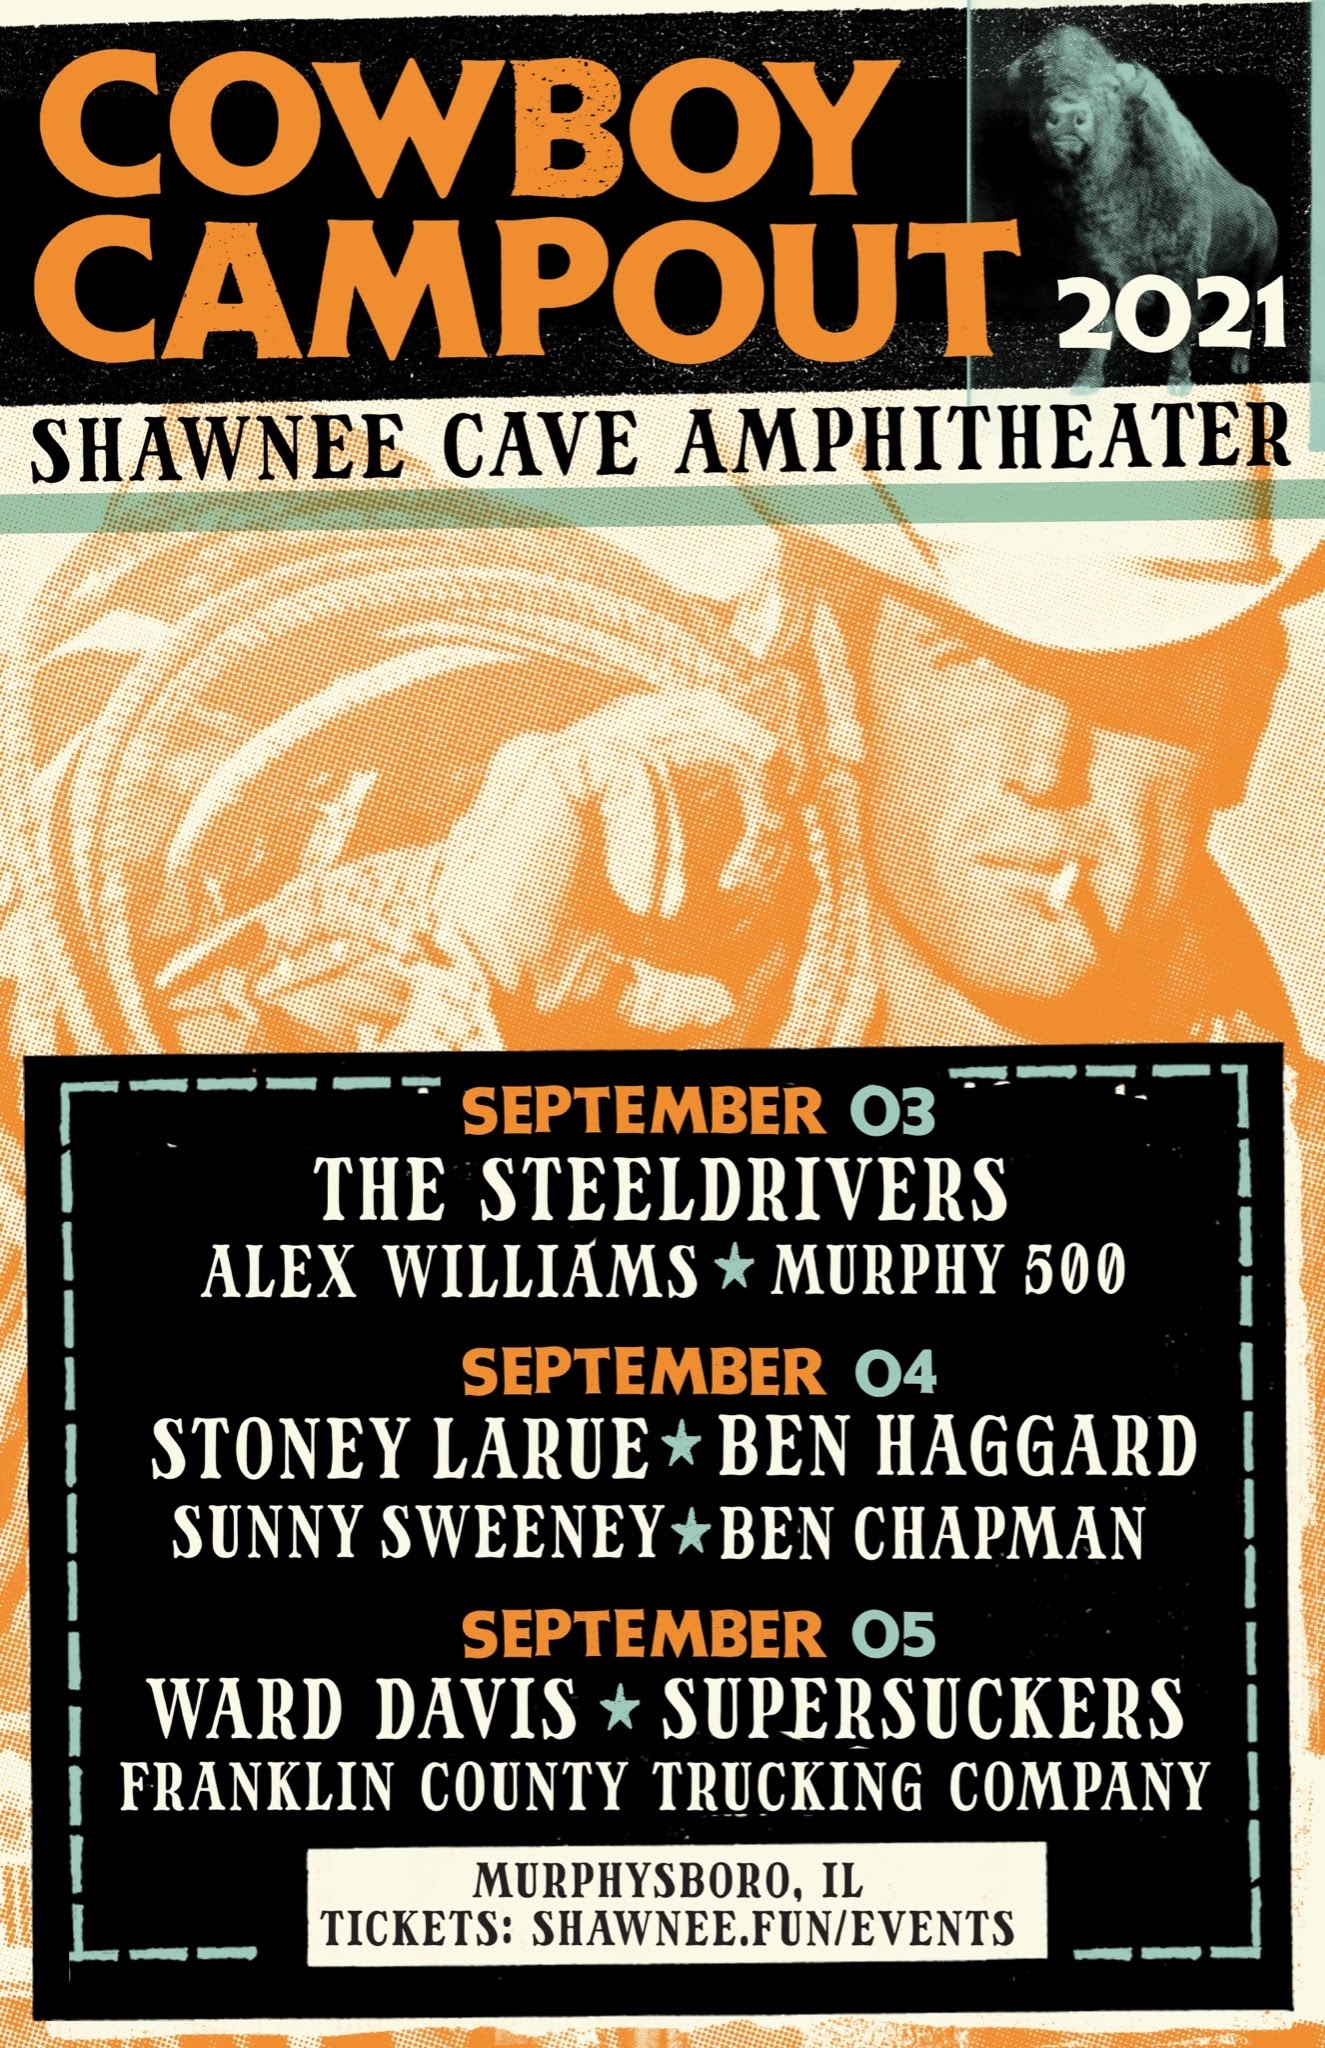  The Shawnee Cave Amphitheater Announces Labor Day Weekend Music Event Cowboy Campout 2021